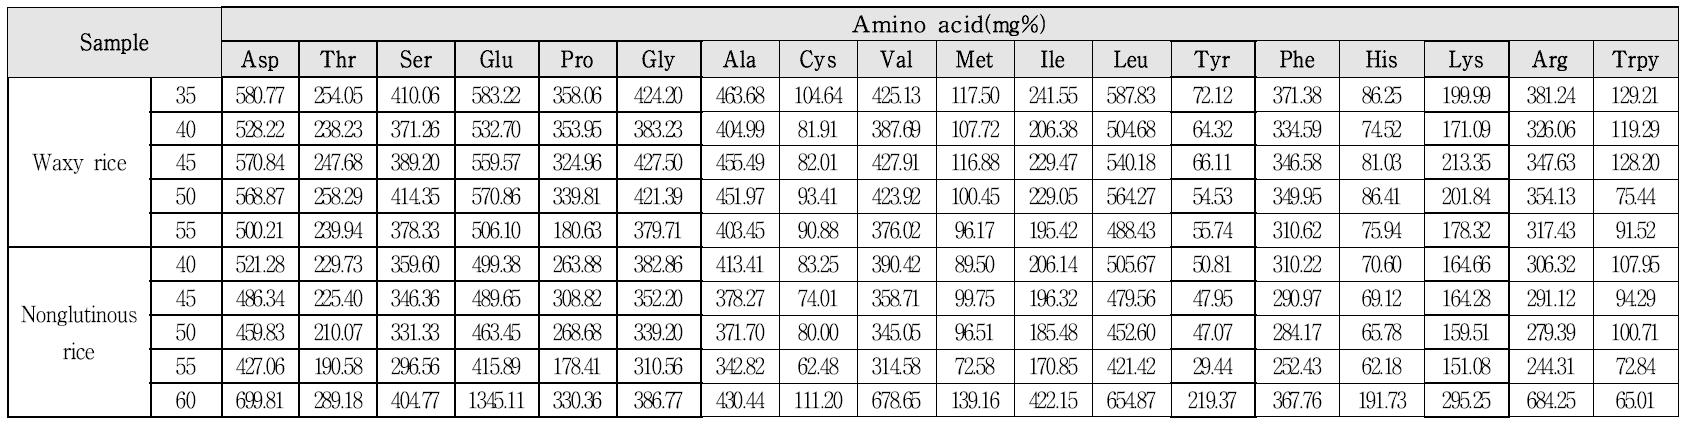 Amino acid contents of Olbyossal made from rough rice harvested at different mature stages